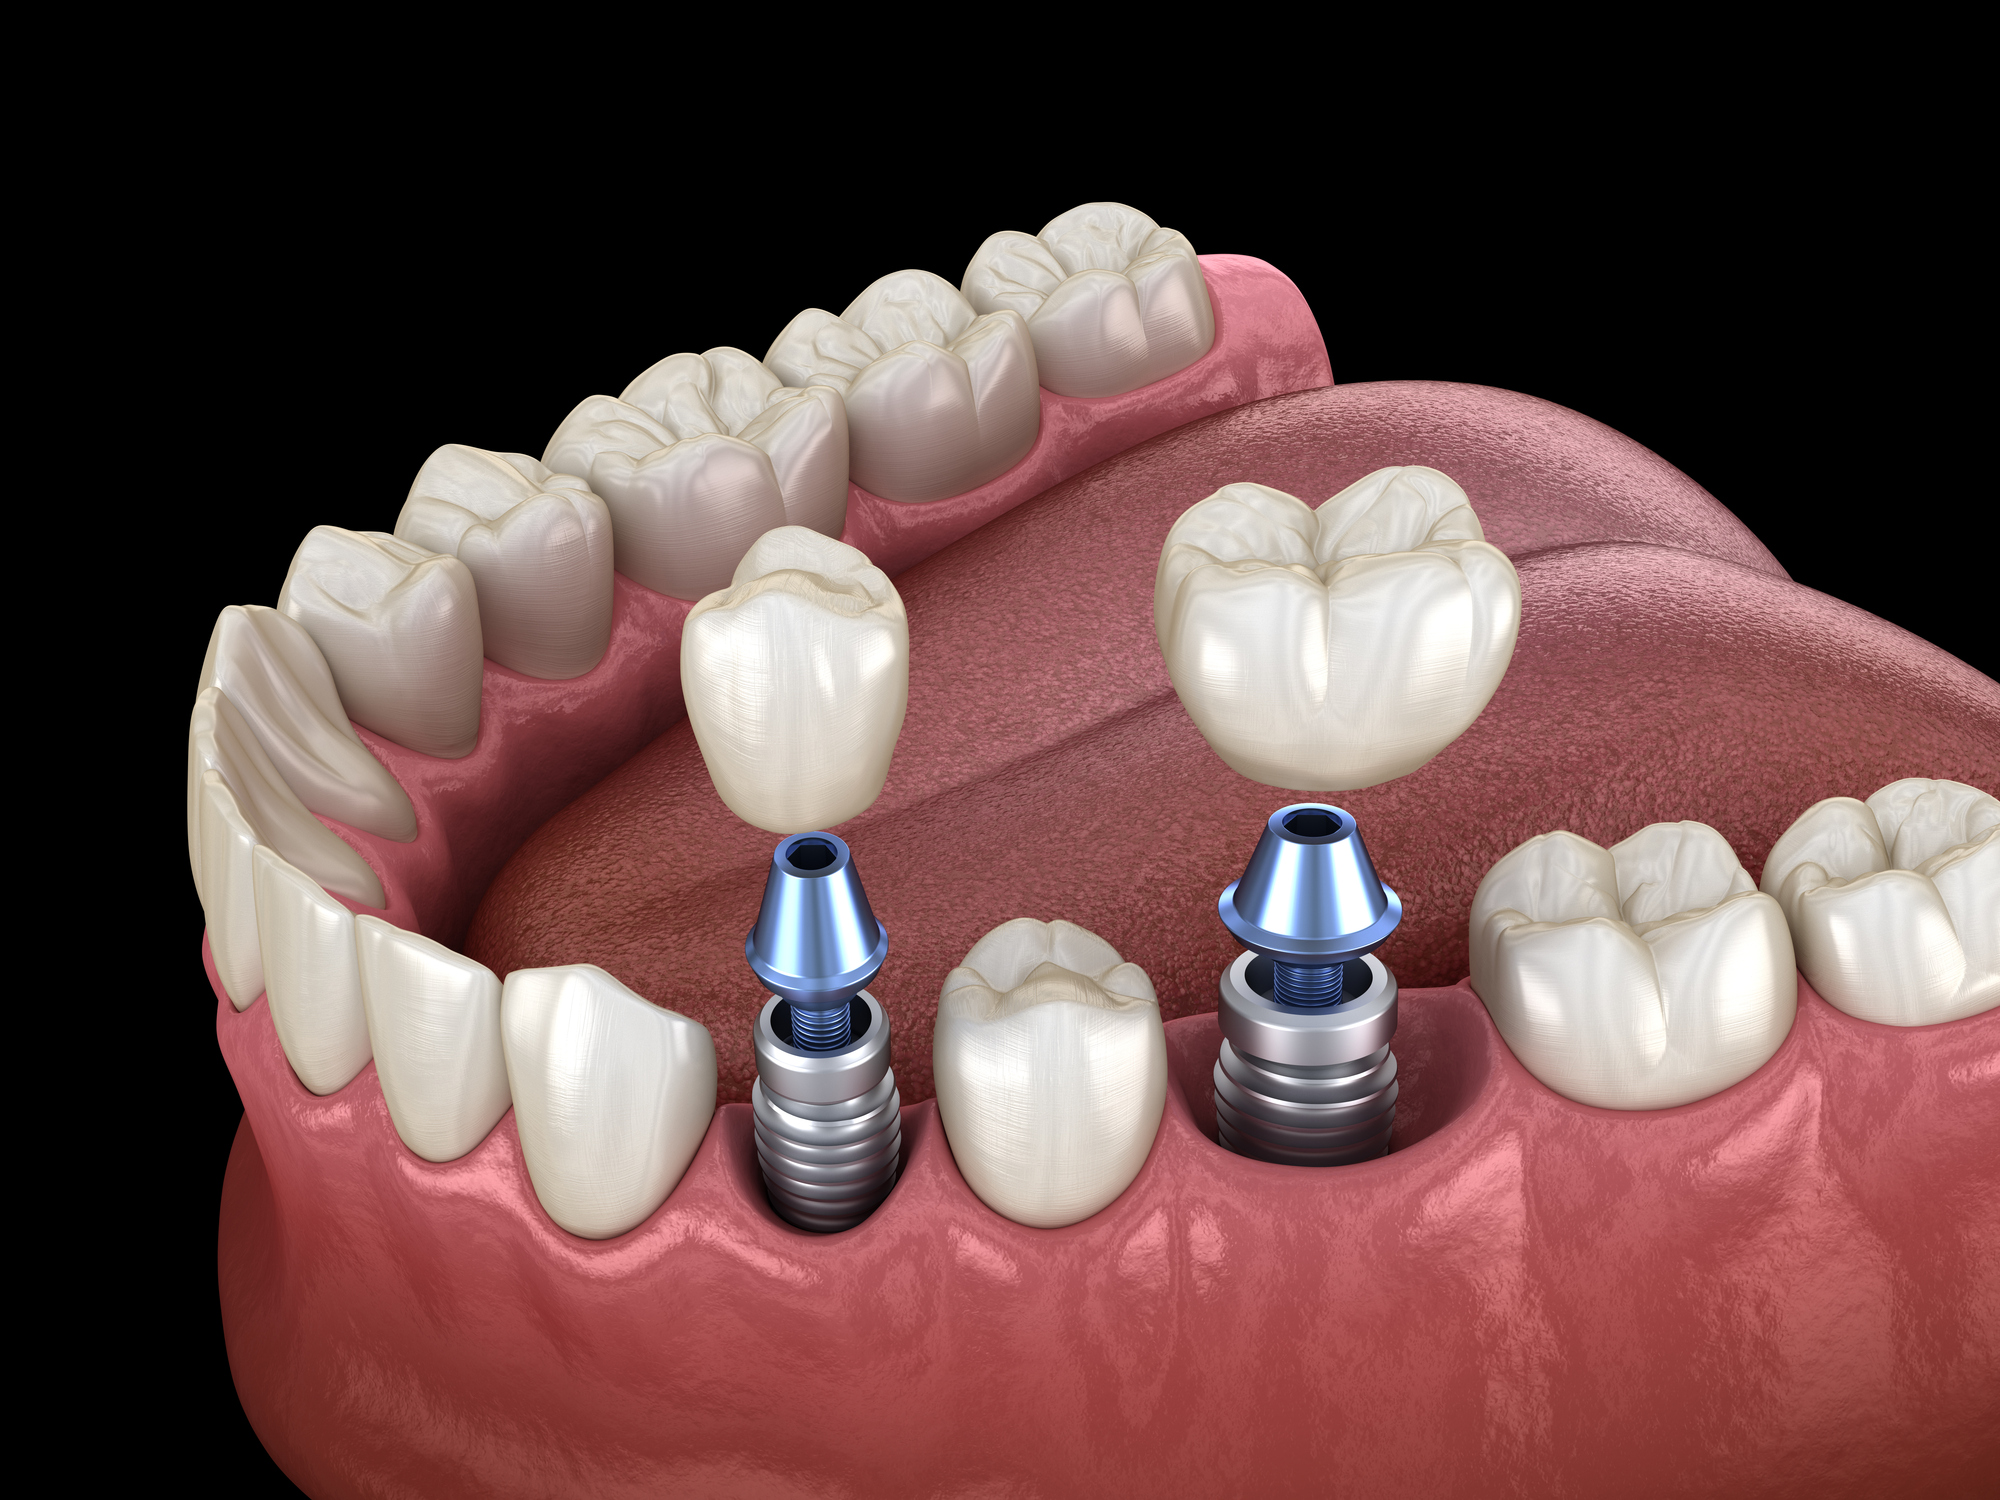 Premolar and Molar tooth crown installation over dental implant